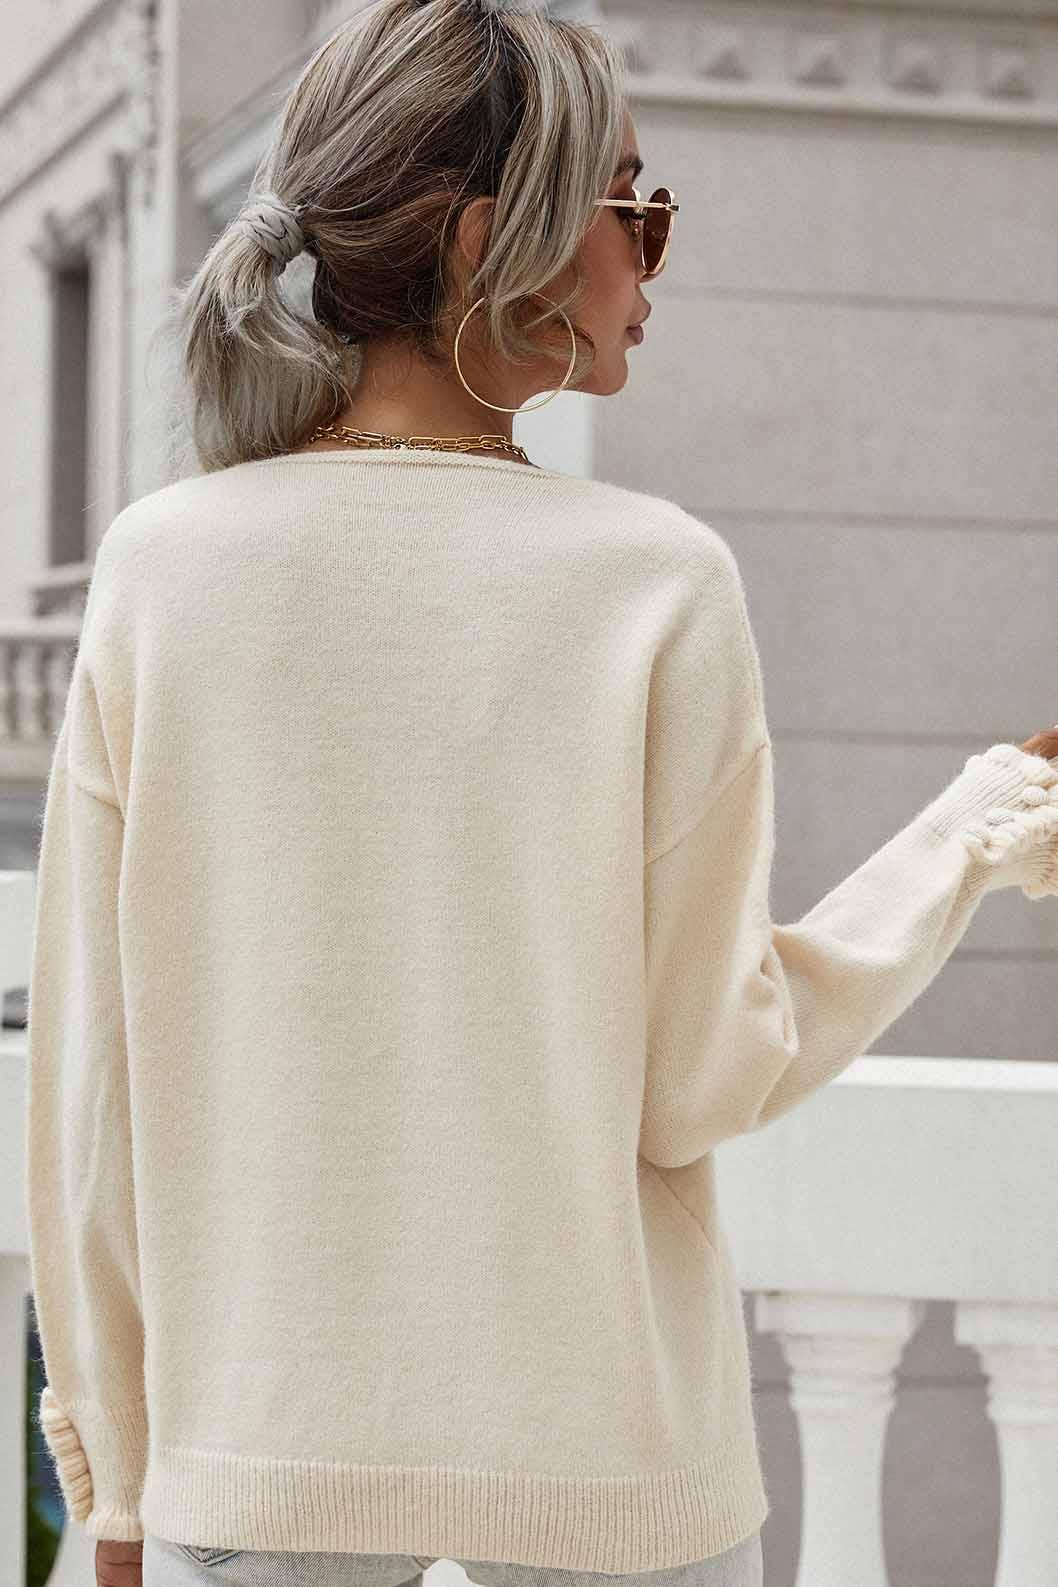 Heather Sweater - Fashion Girl Online Store